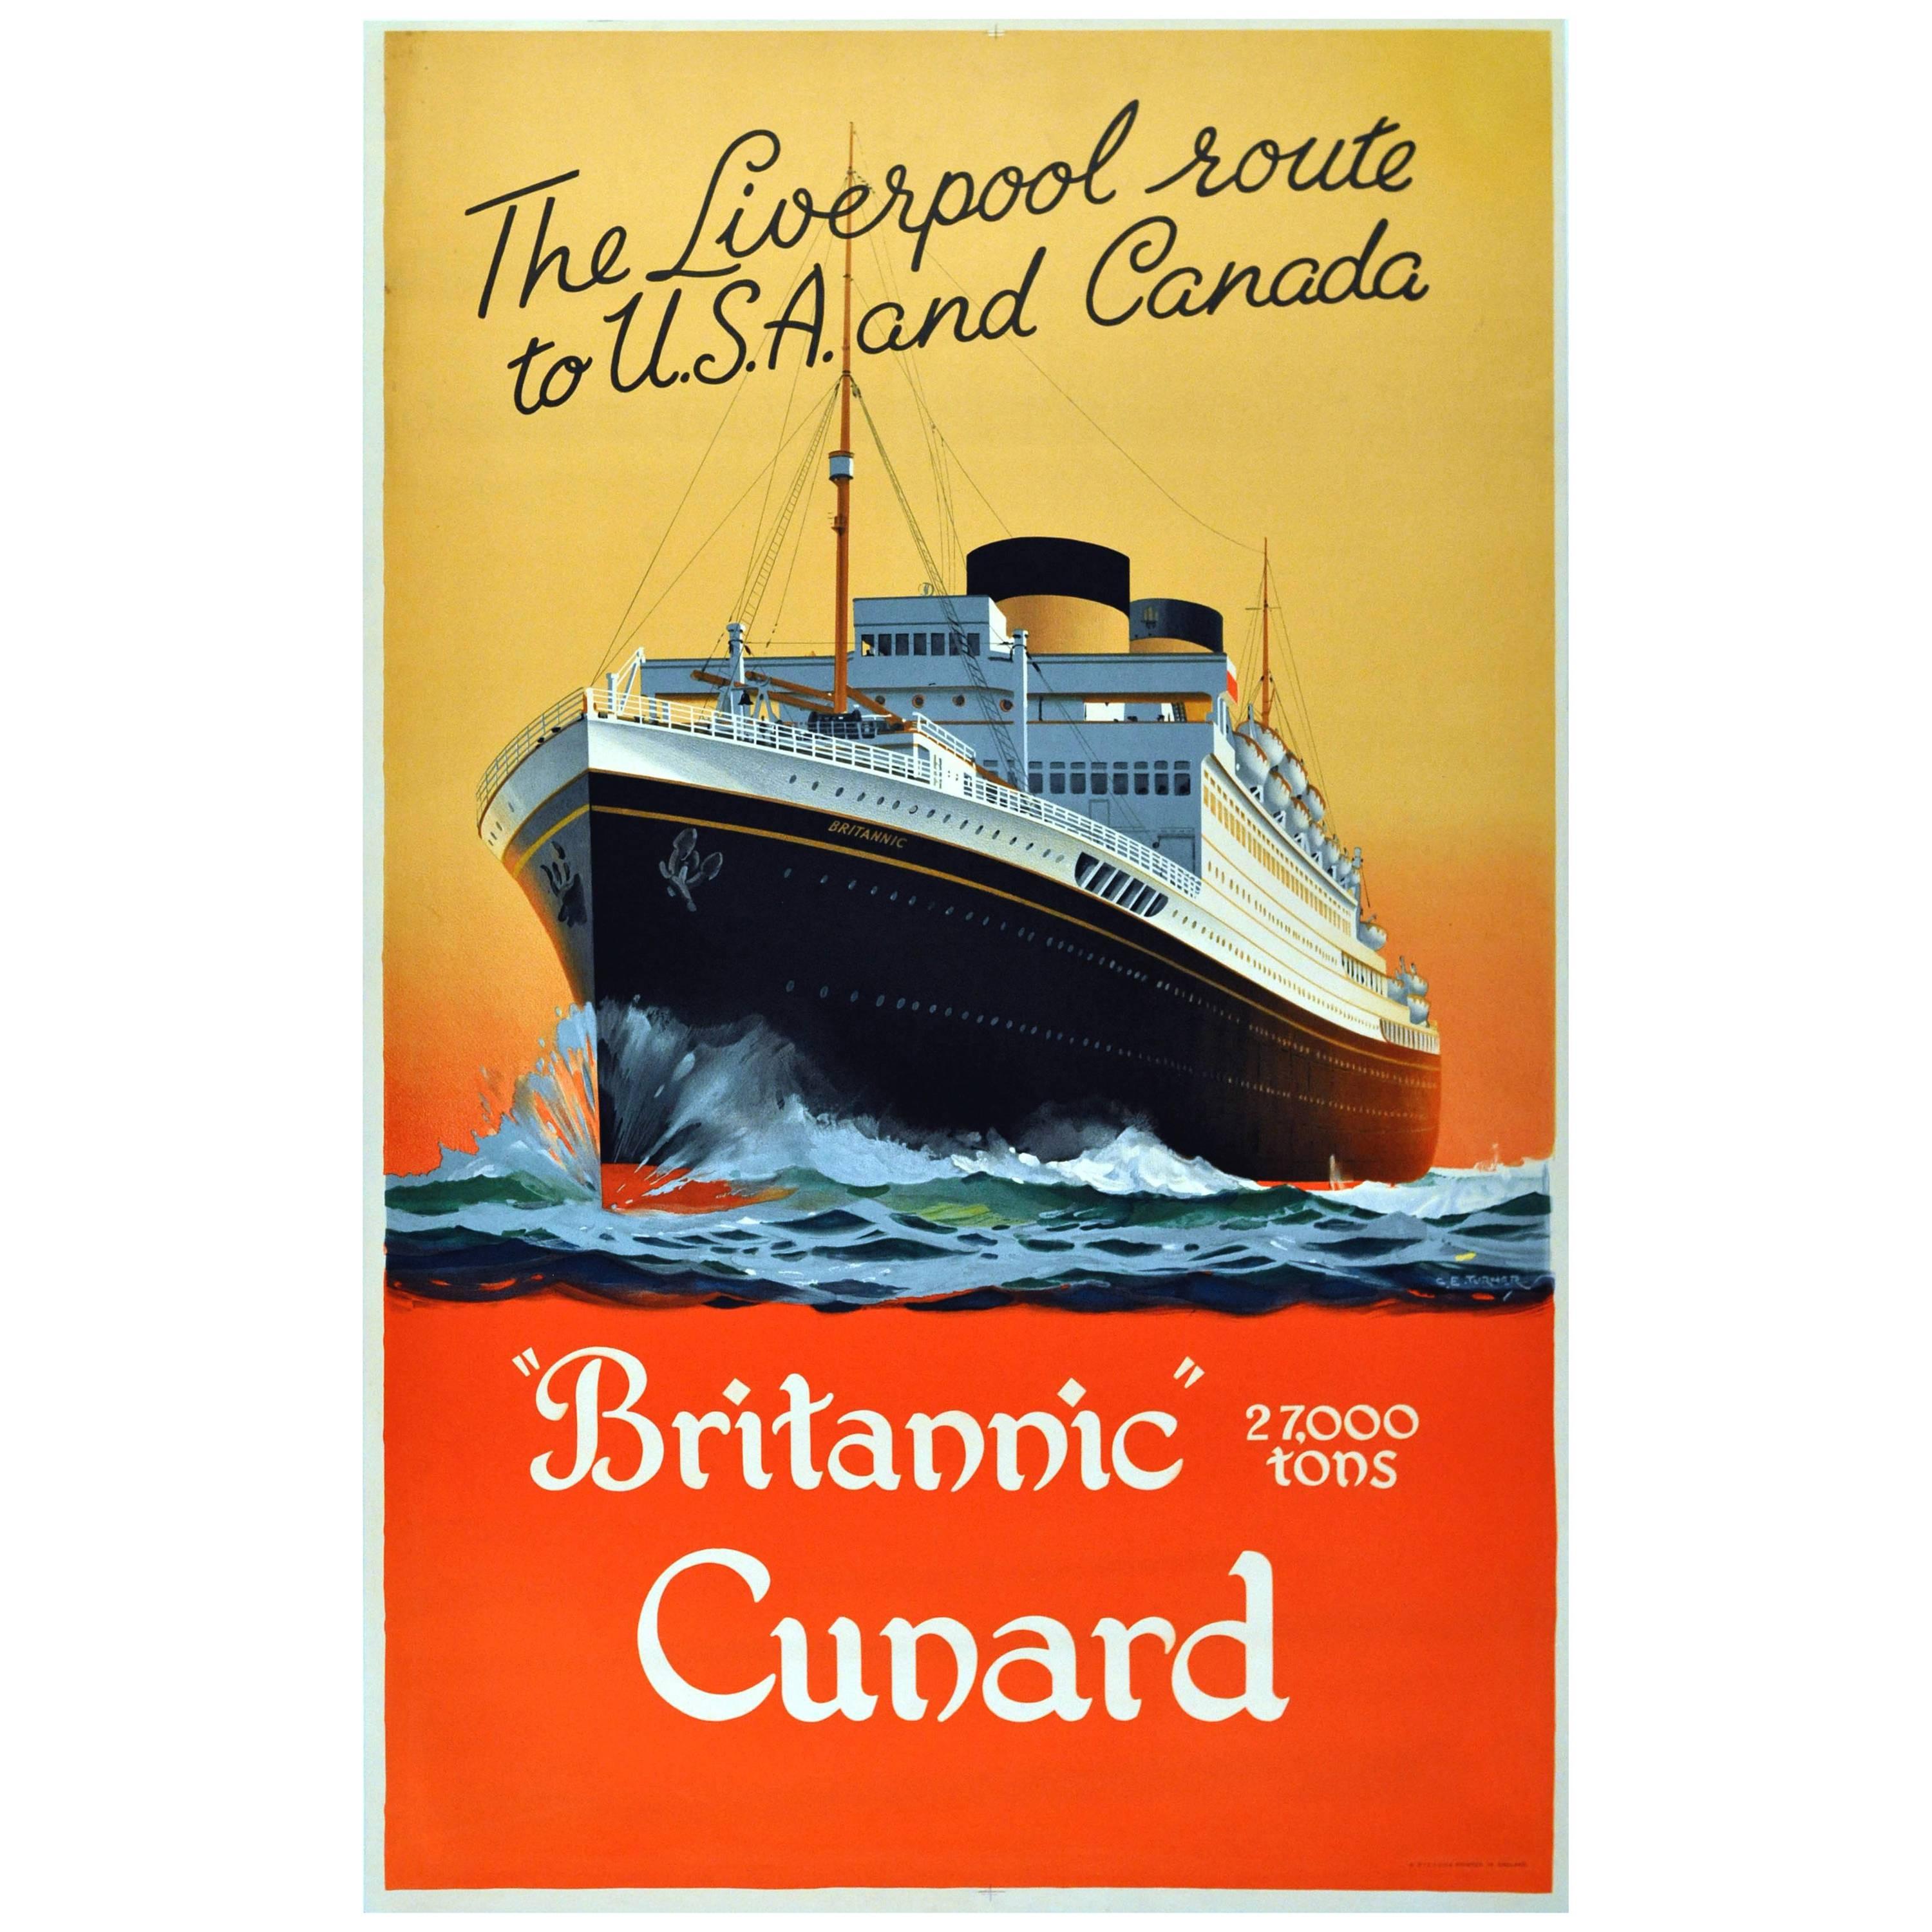 1930s Poster for Cunard Britannic, 'The Liverpool Route to USA and Canada'